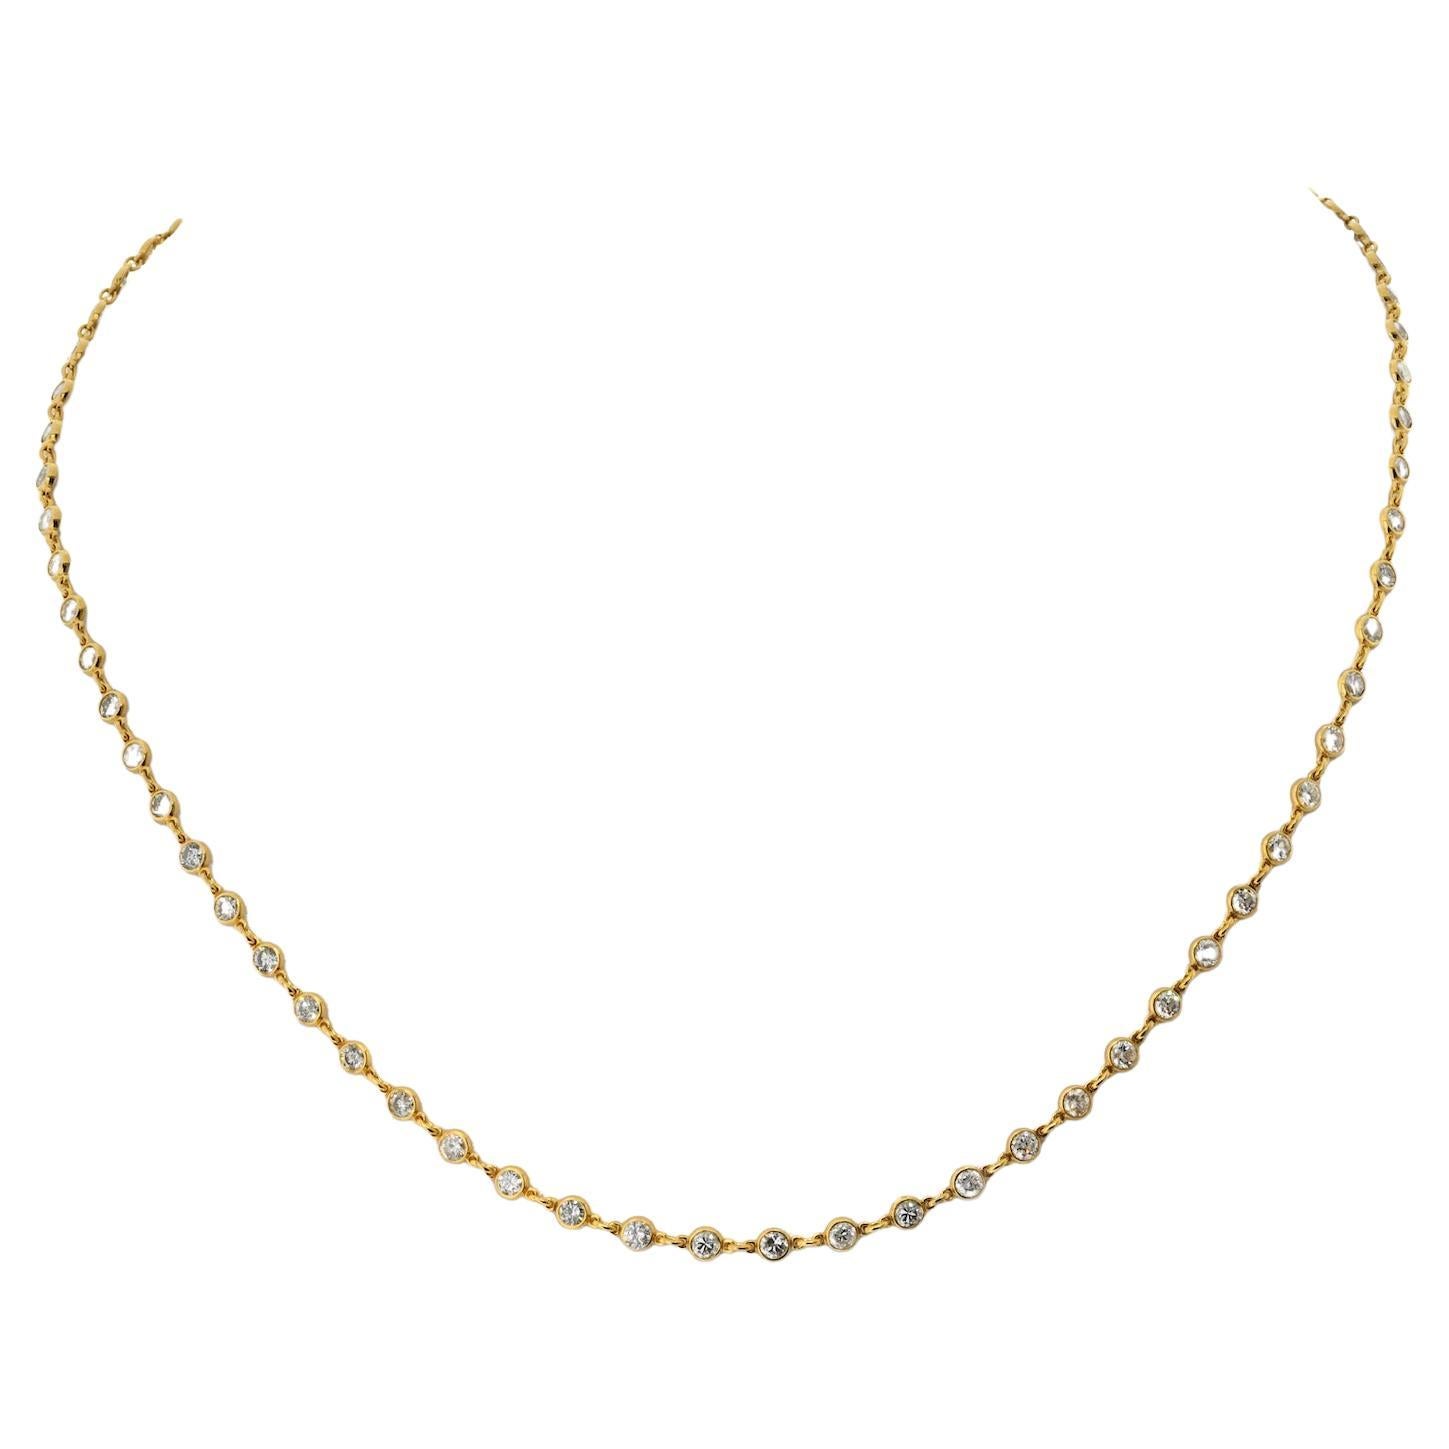 18K Yellow Gold 6.02cttw Diamond By The Yard 16 Inch Chain Necklace For Sale